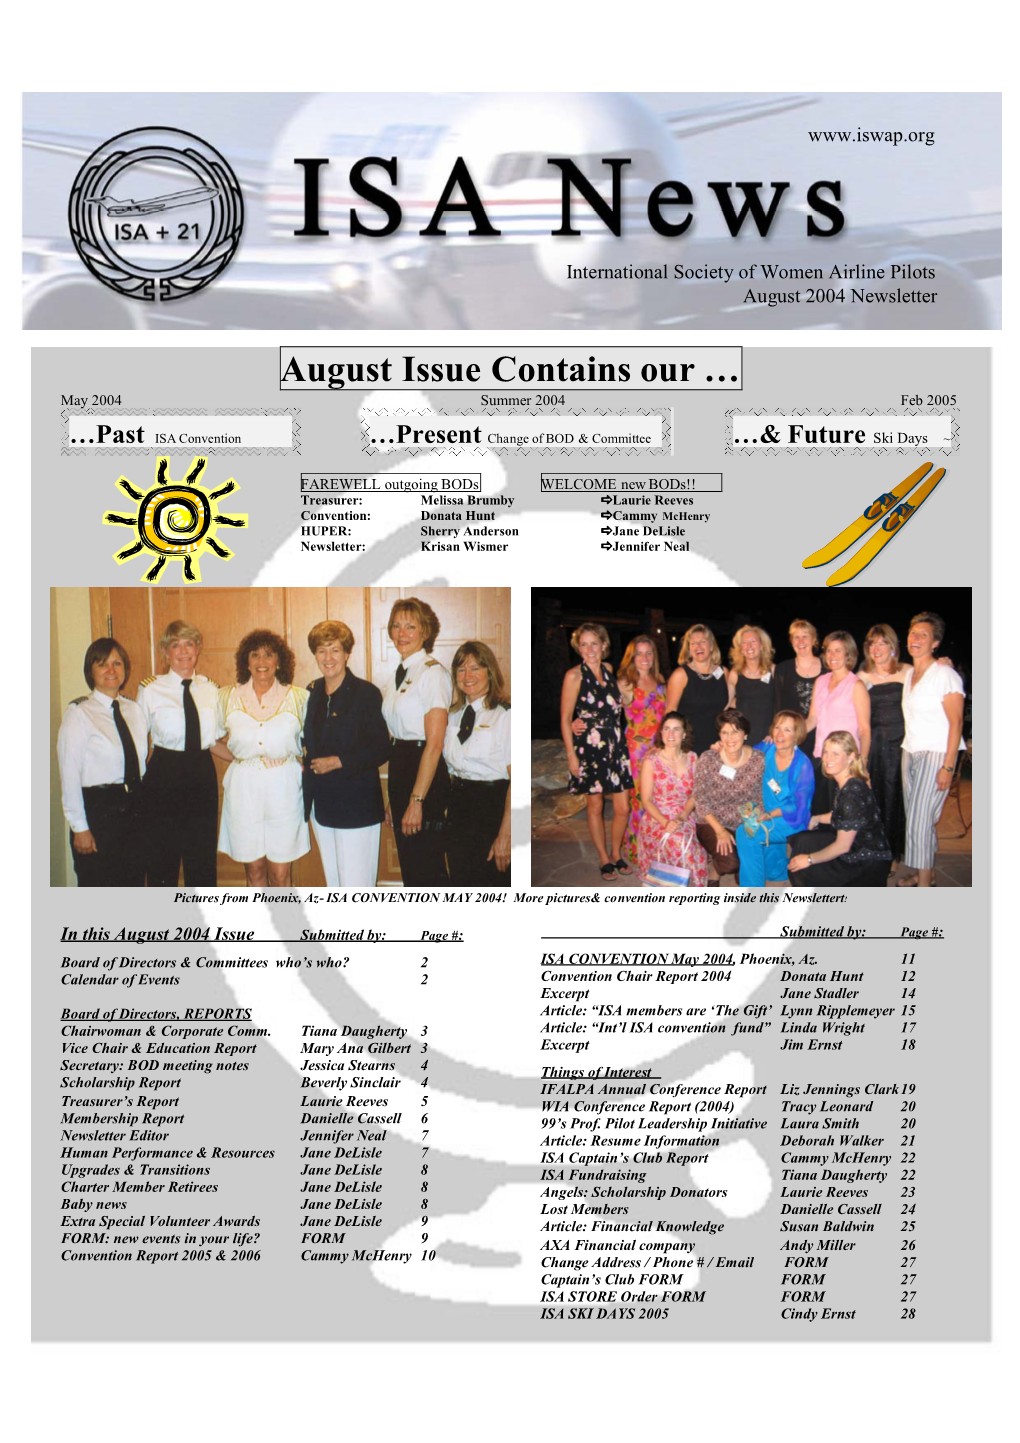 August Issue Contains Our … May 2004 Summer 2004 Feb 2005